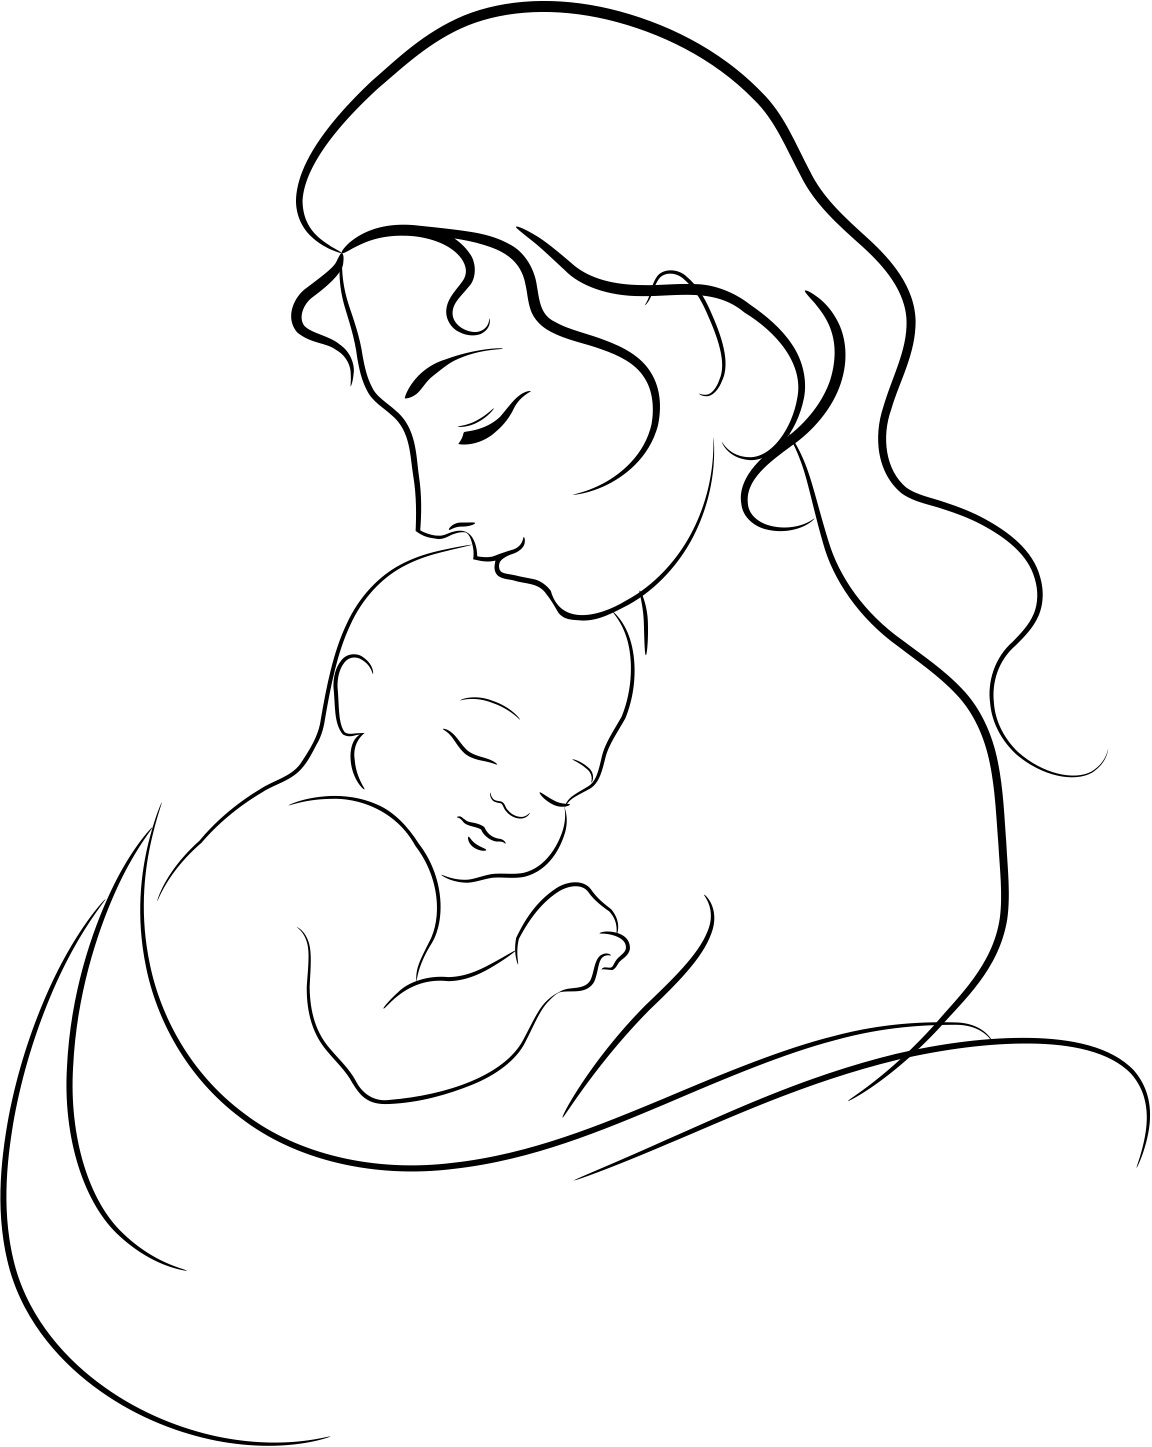 How to Draw Mother and Child Drawing - YouTube